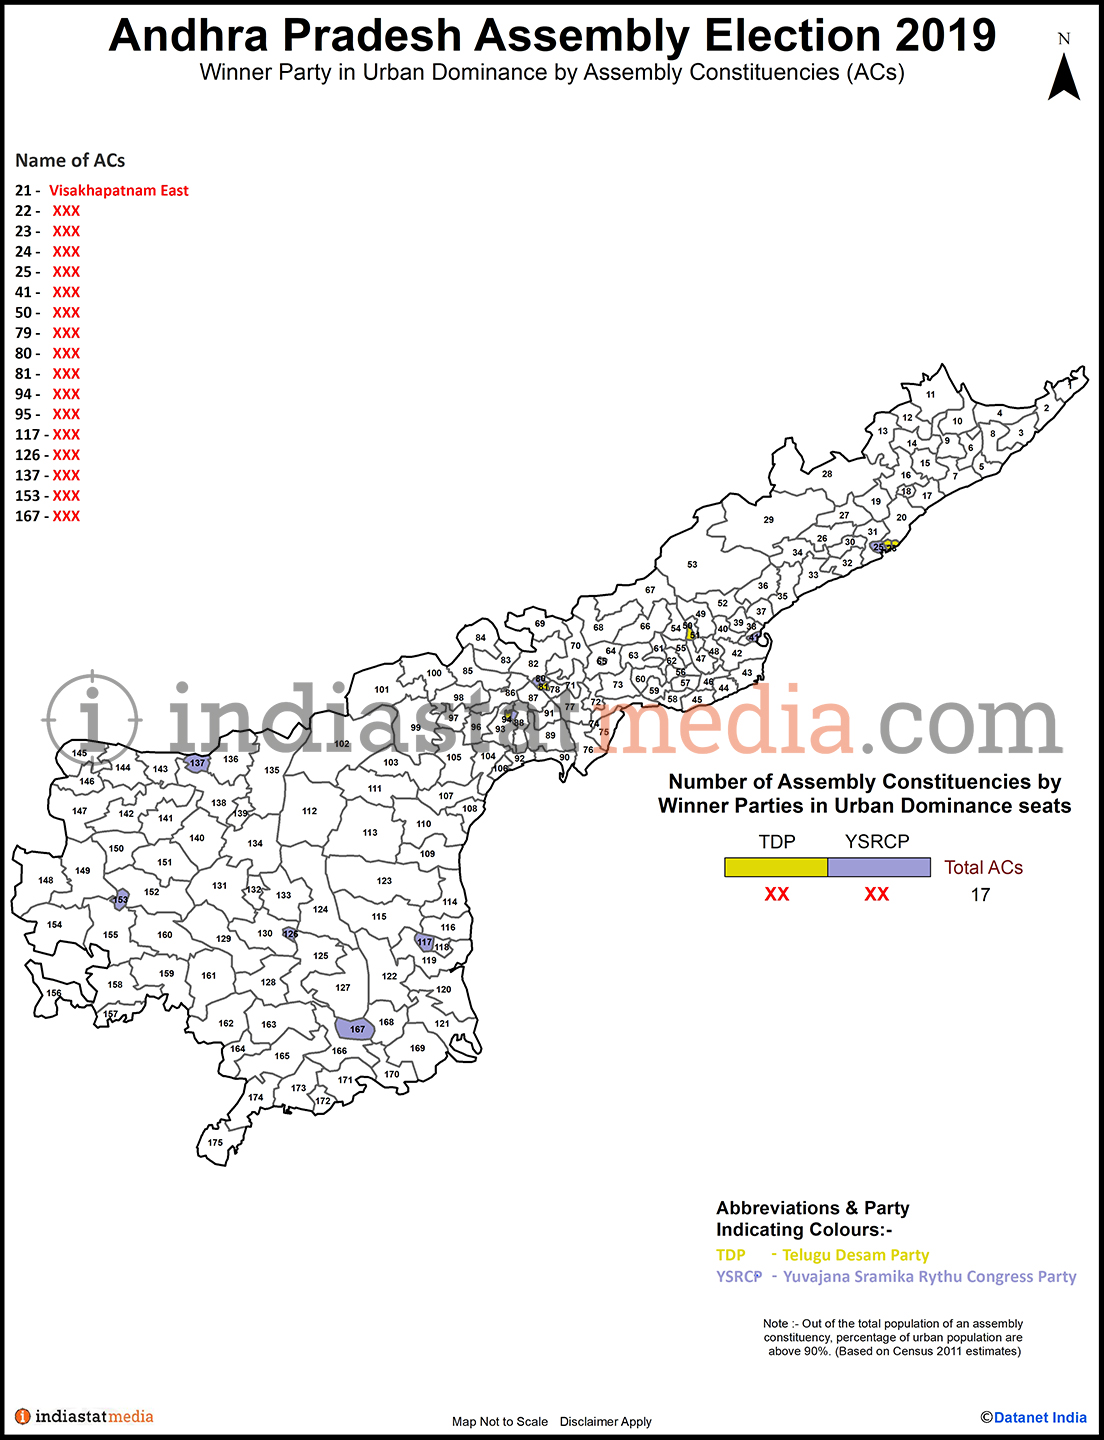 Winner Parties in Urban Dominance Constituencies in Andhra Pradesh (Assembly Election - 2019)